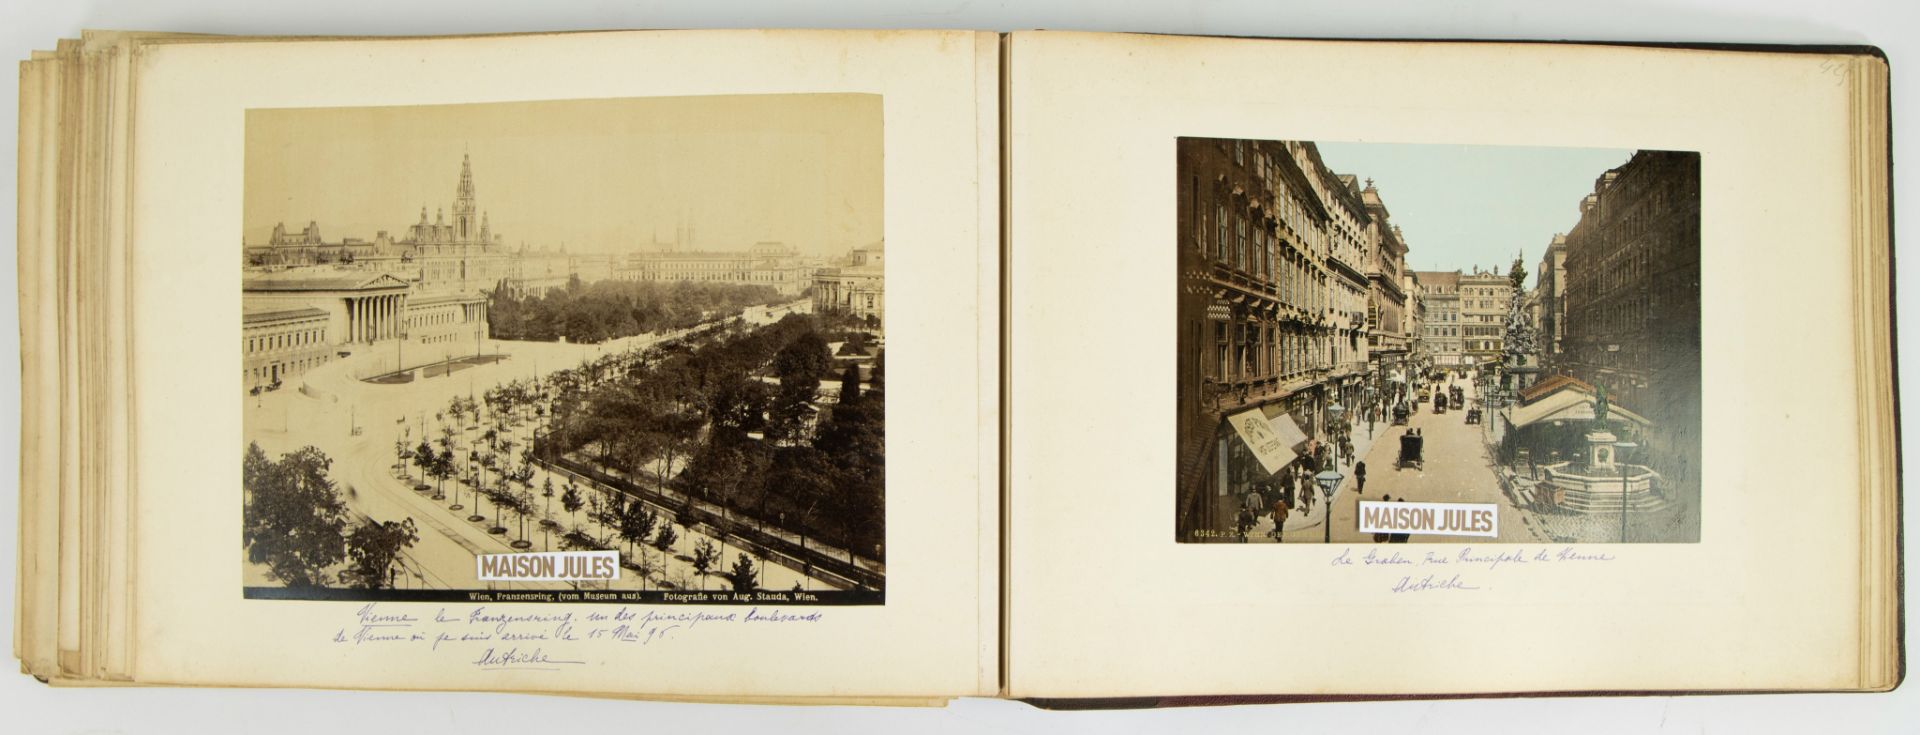 Photo album: A Belgian fellowship embarks on a world tour from 1896 to 1897 - Image 5 of 5